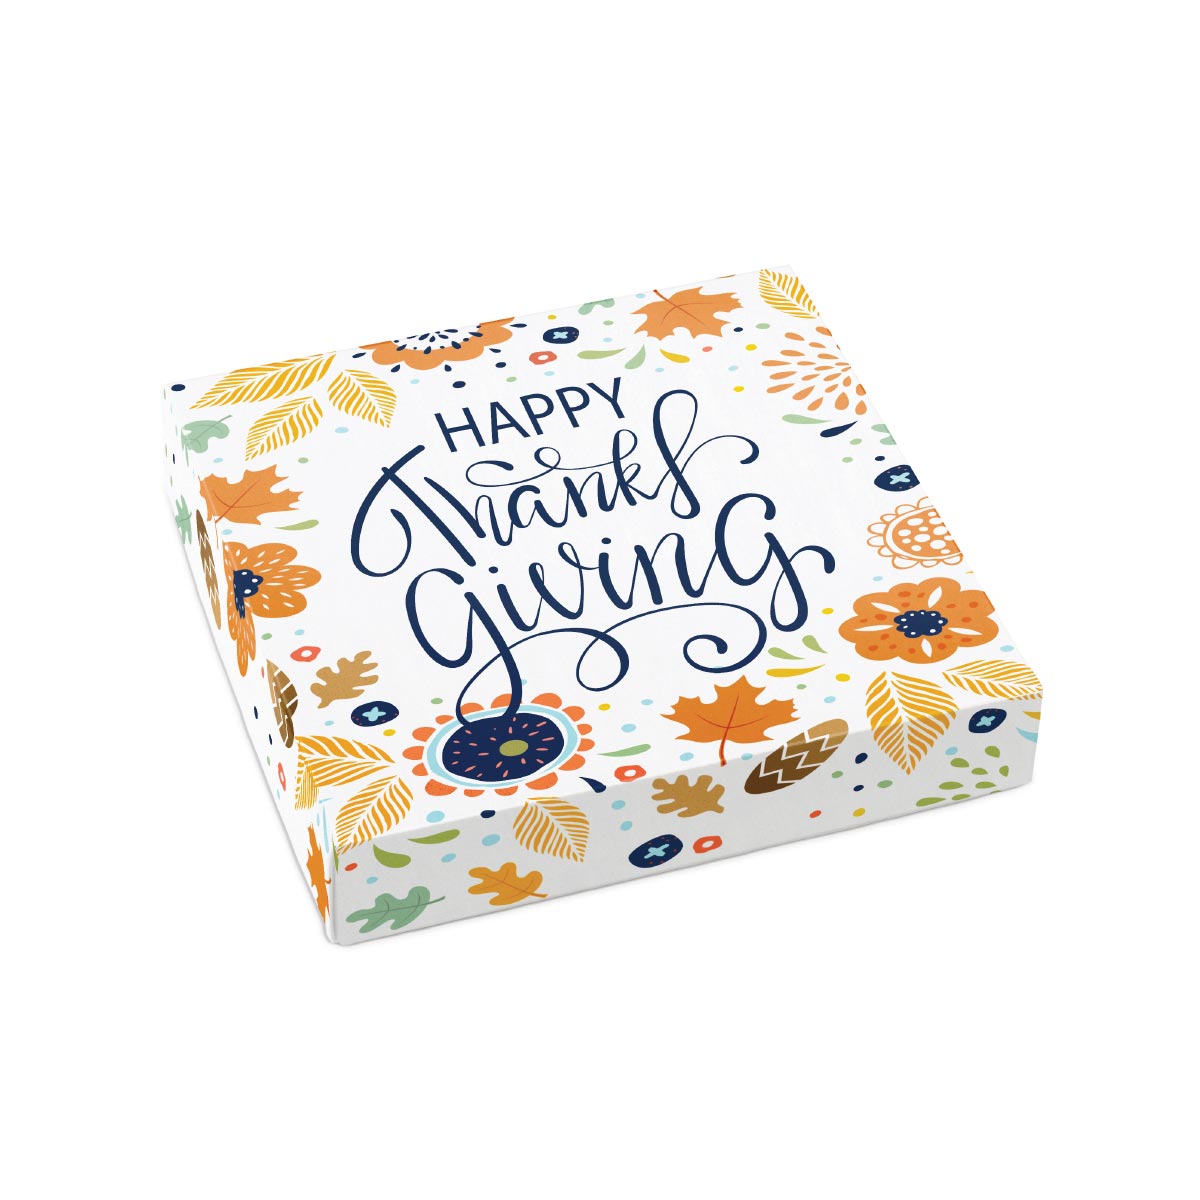 Floral Thanksgiving Themed Box Cover for 9 Piece Holiday Assortment